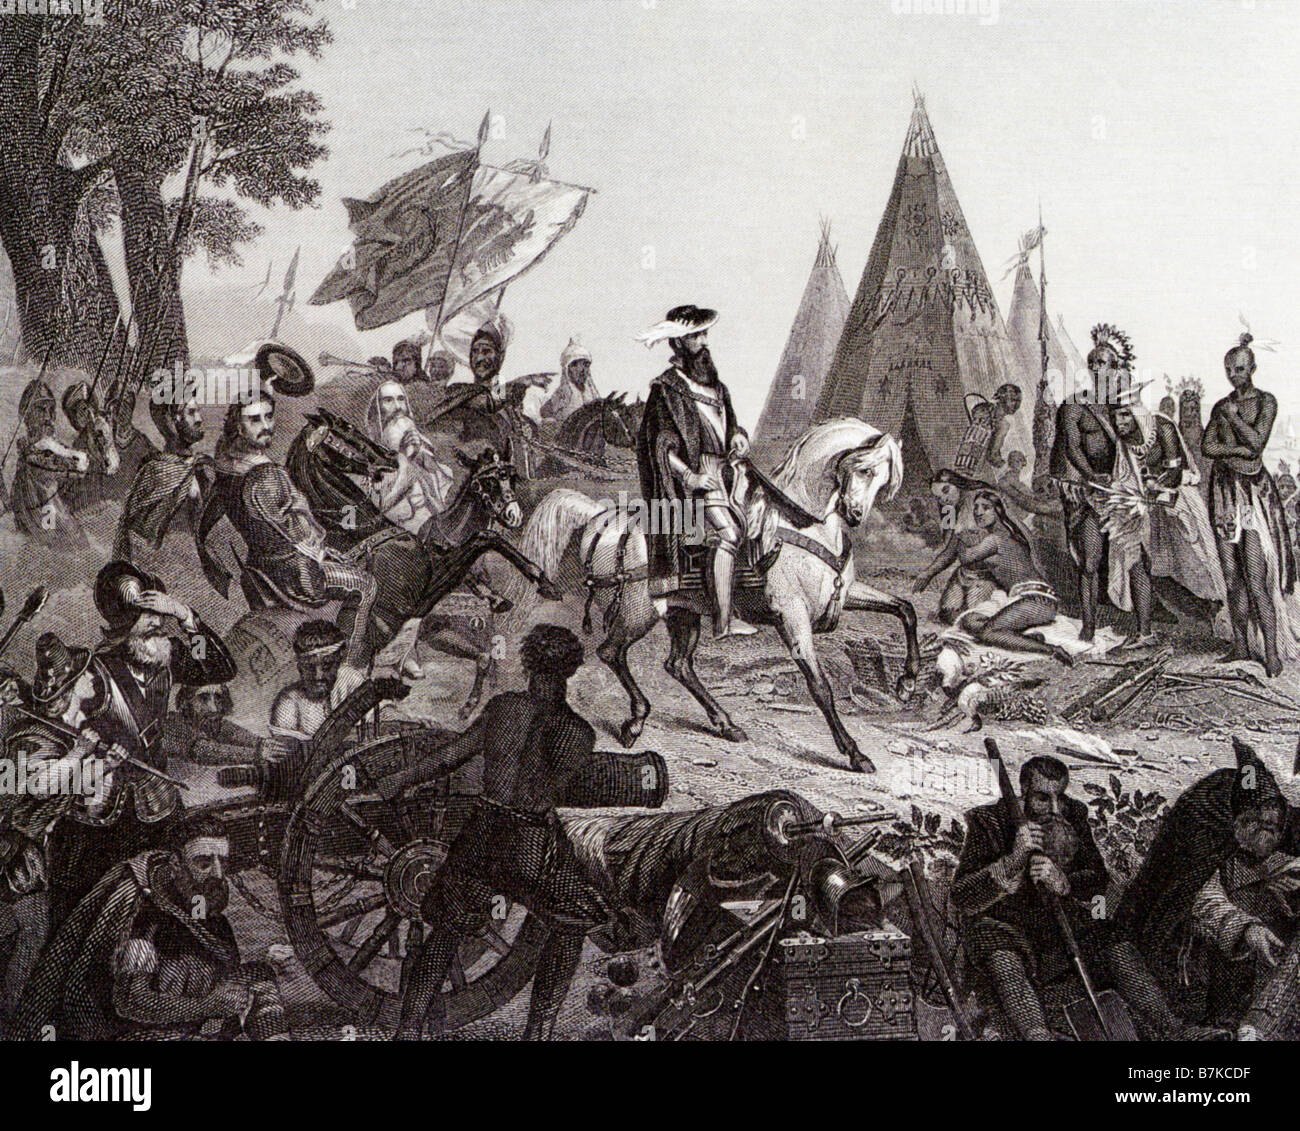 HERNANDO DE SOTO The Spanish Conquistador is shown discovering the Mississippi River in a 19th century engraving Stock Photo